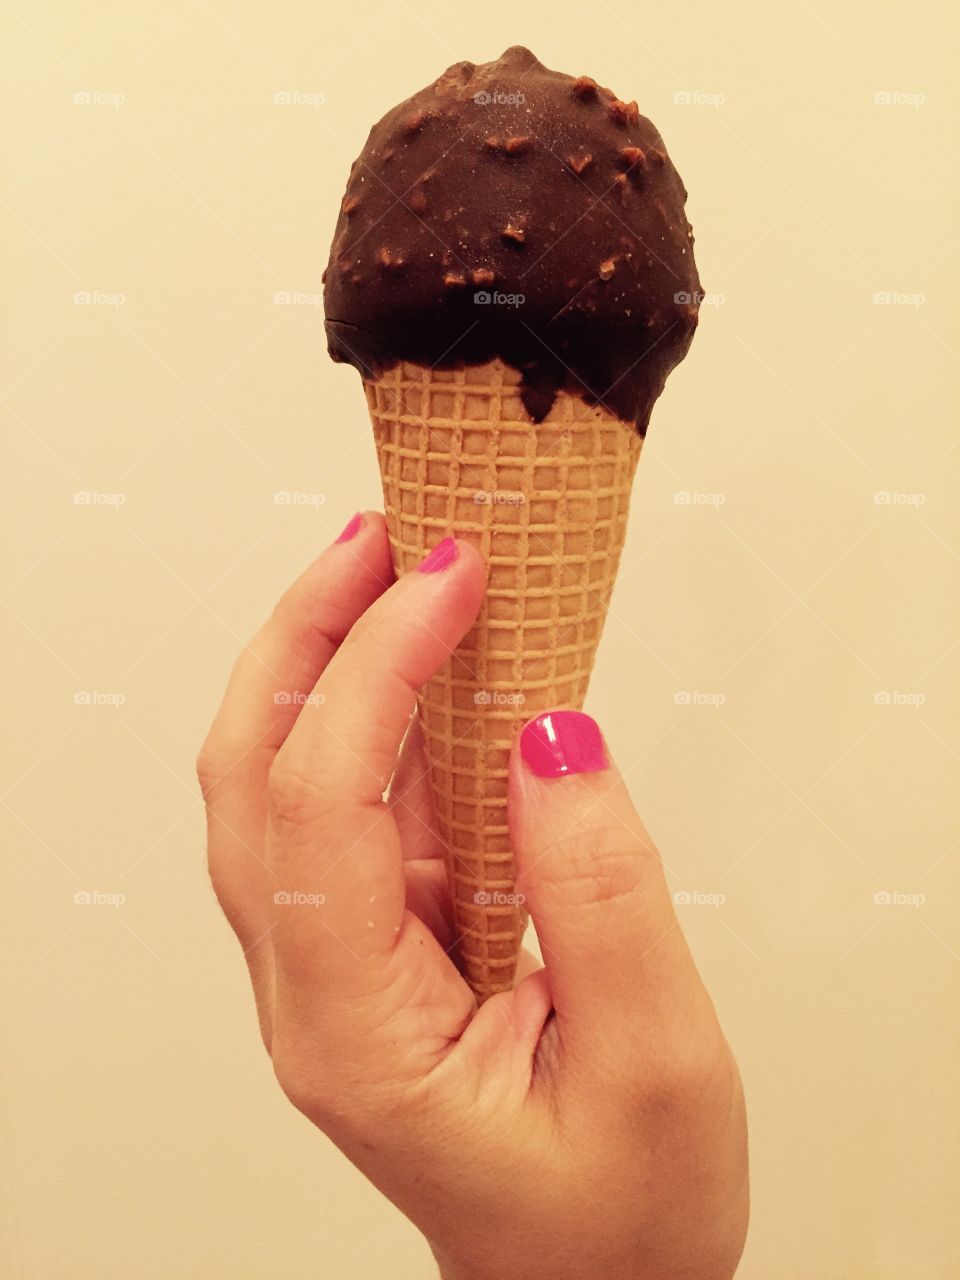 Hands holding Ice Cream. Ice cream candy dipped cone